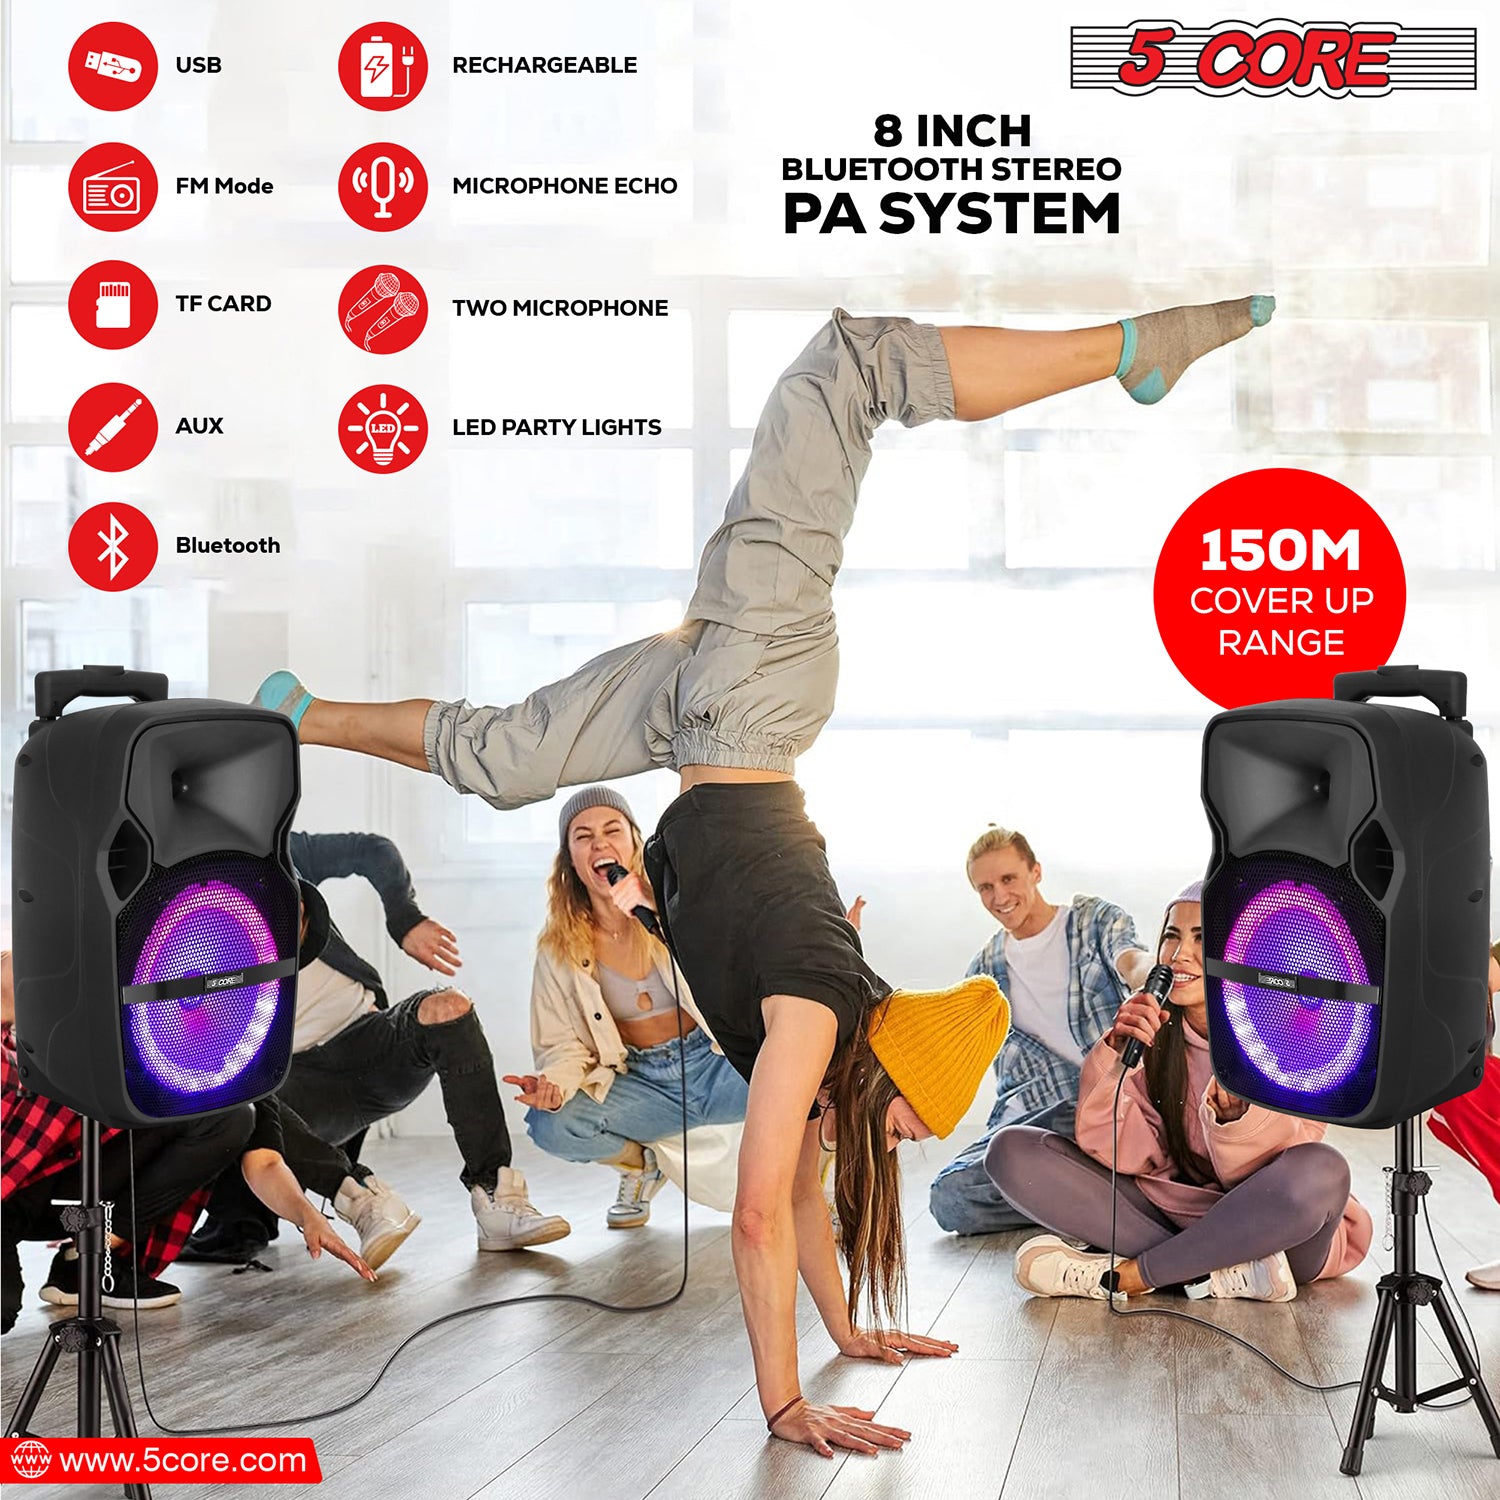 5Core Portable PA System: Big-powered Bluetooth party speaker with 2 wireless mics for karaoke and DJ events.